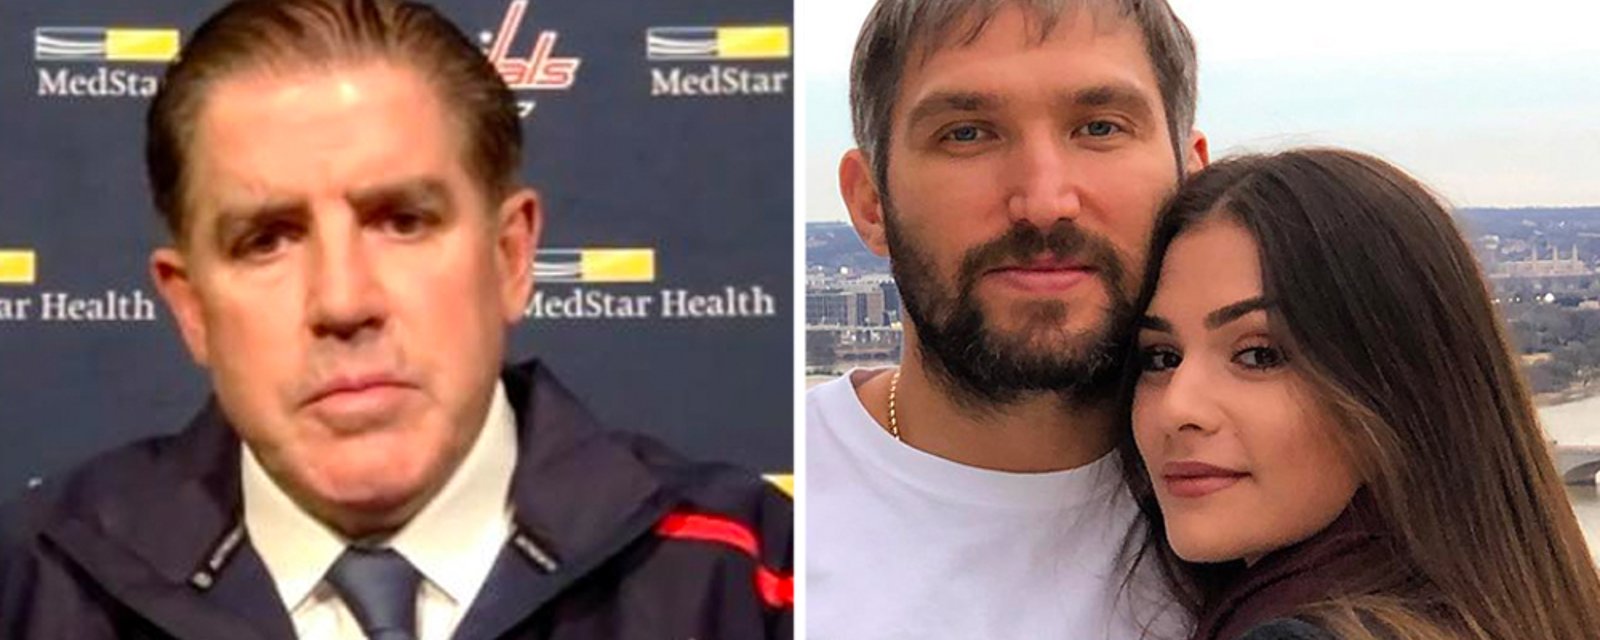 Ovechkin’s coach slams him and his wife defends him after breaking NHL protocol